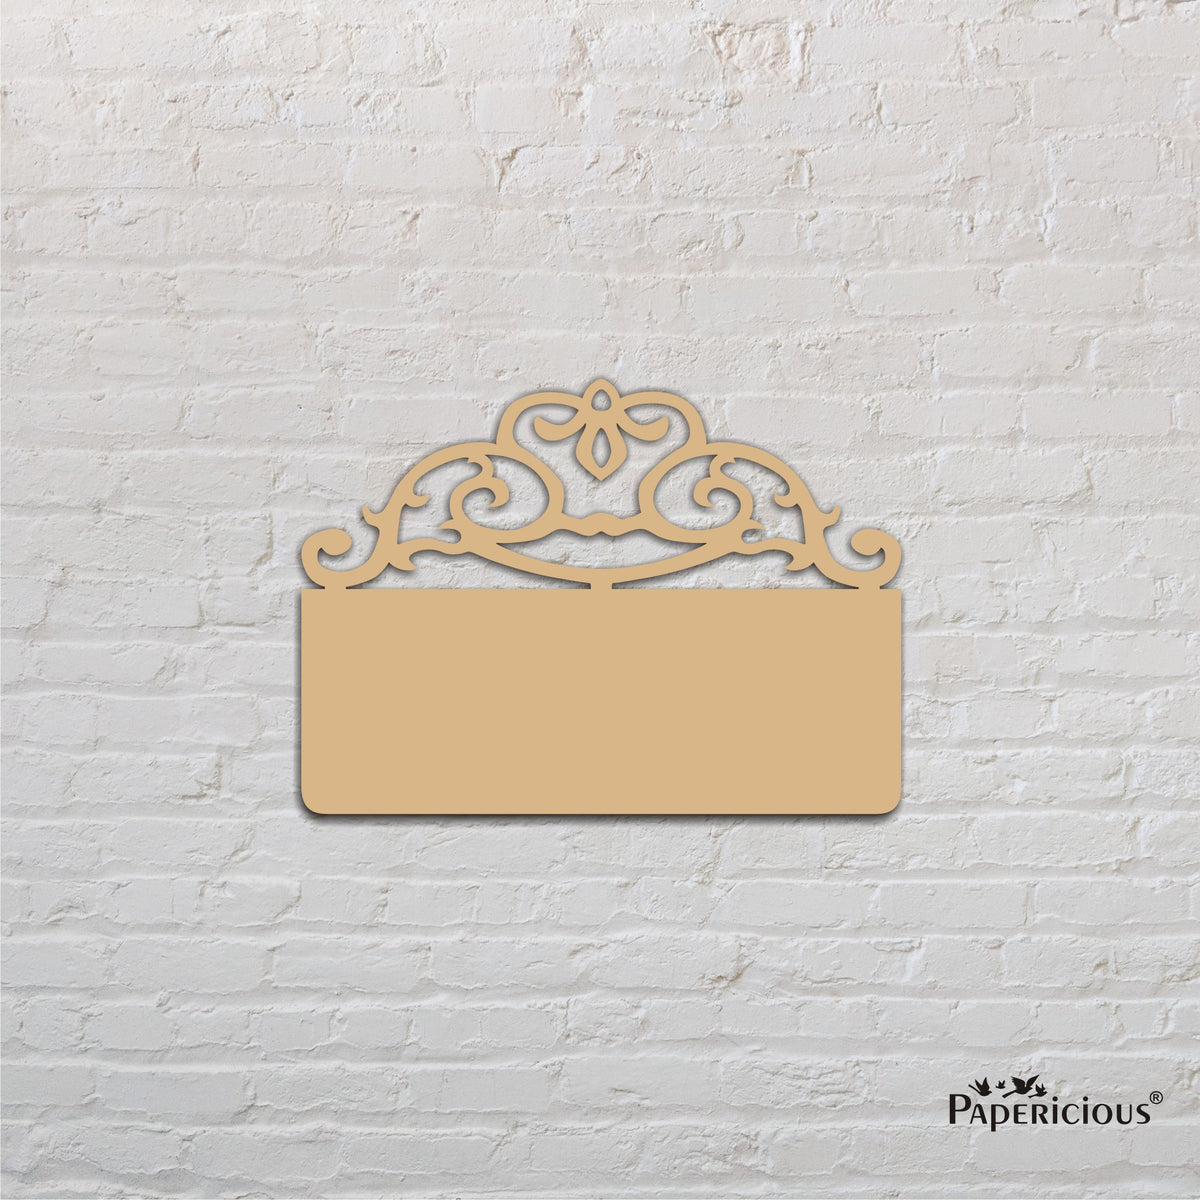 PAPERICIOUS 4.2mm thick MDF Name Plate Contemporary